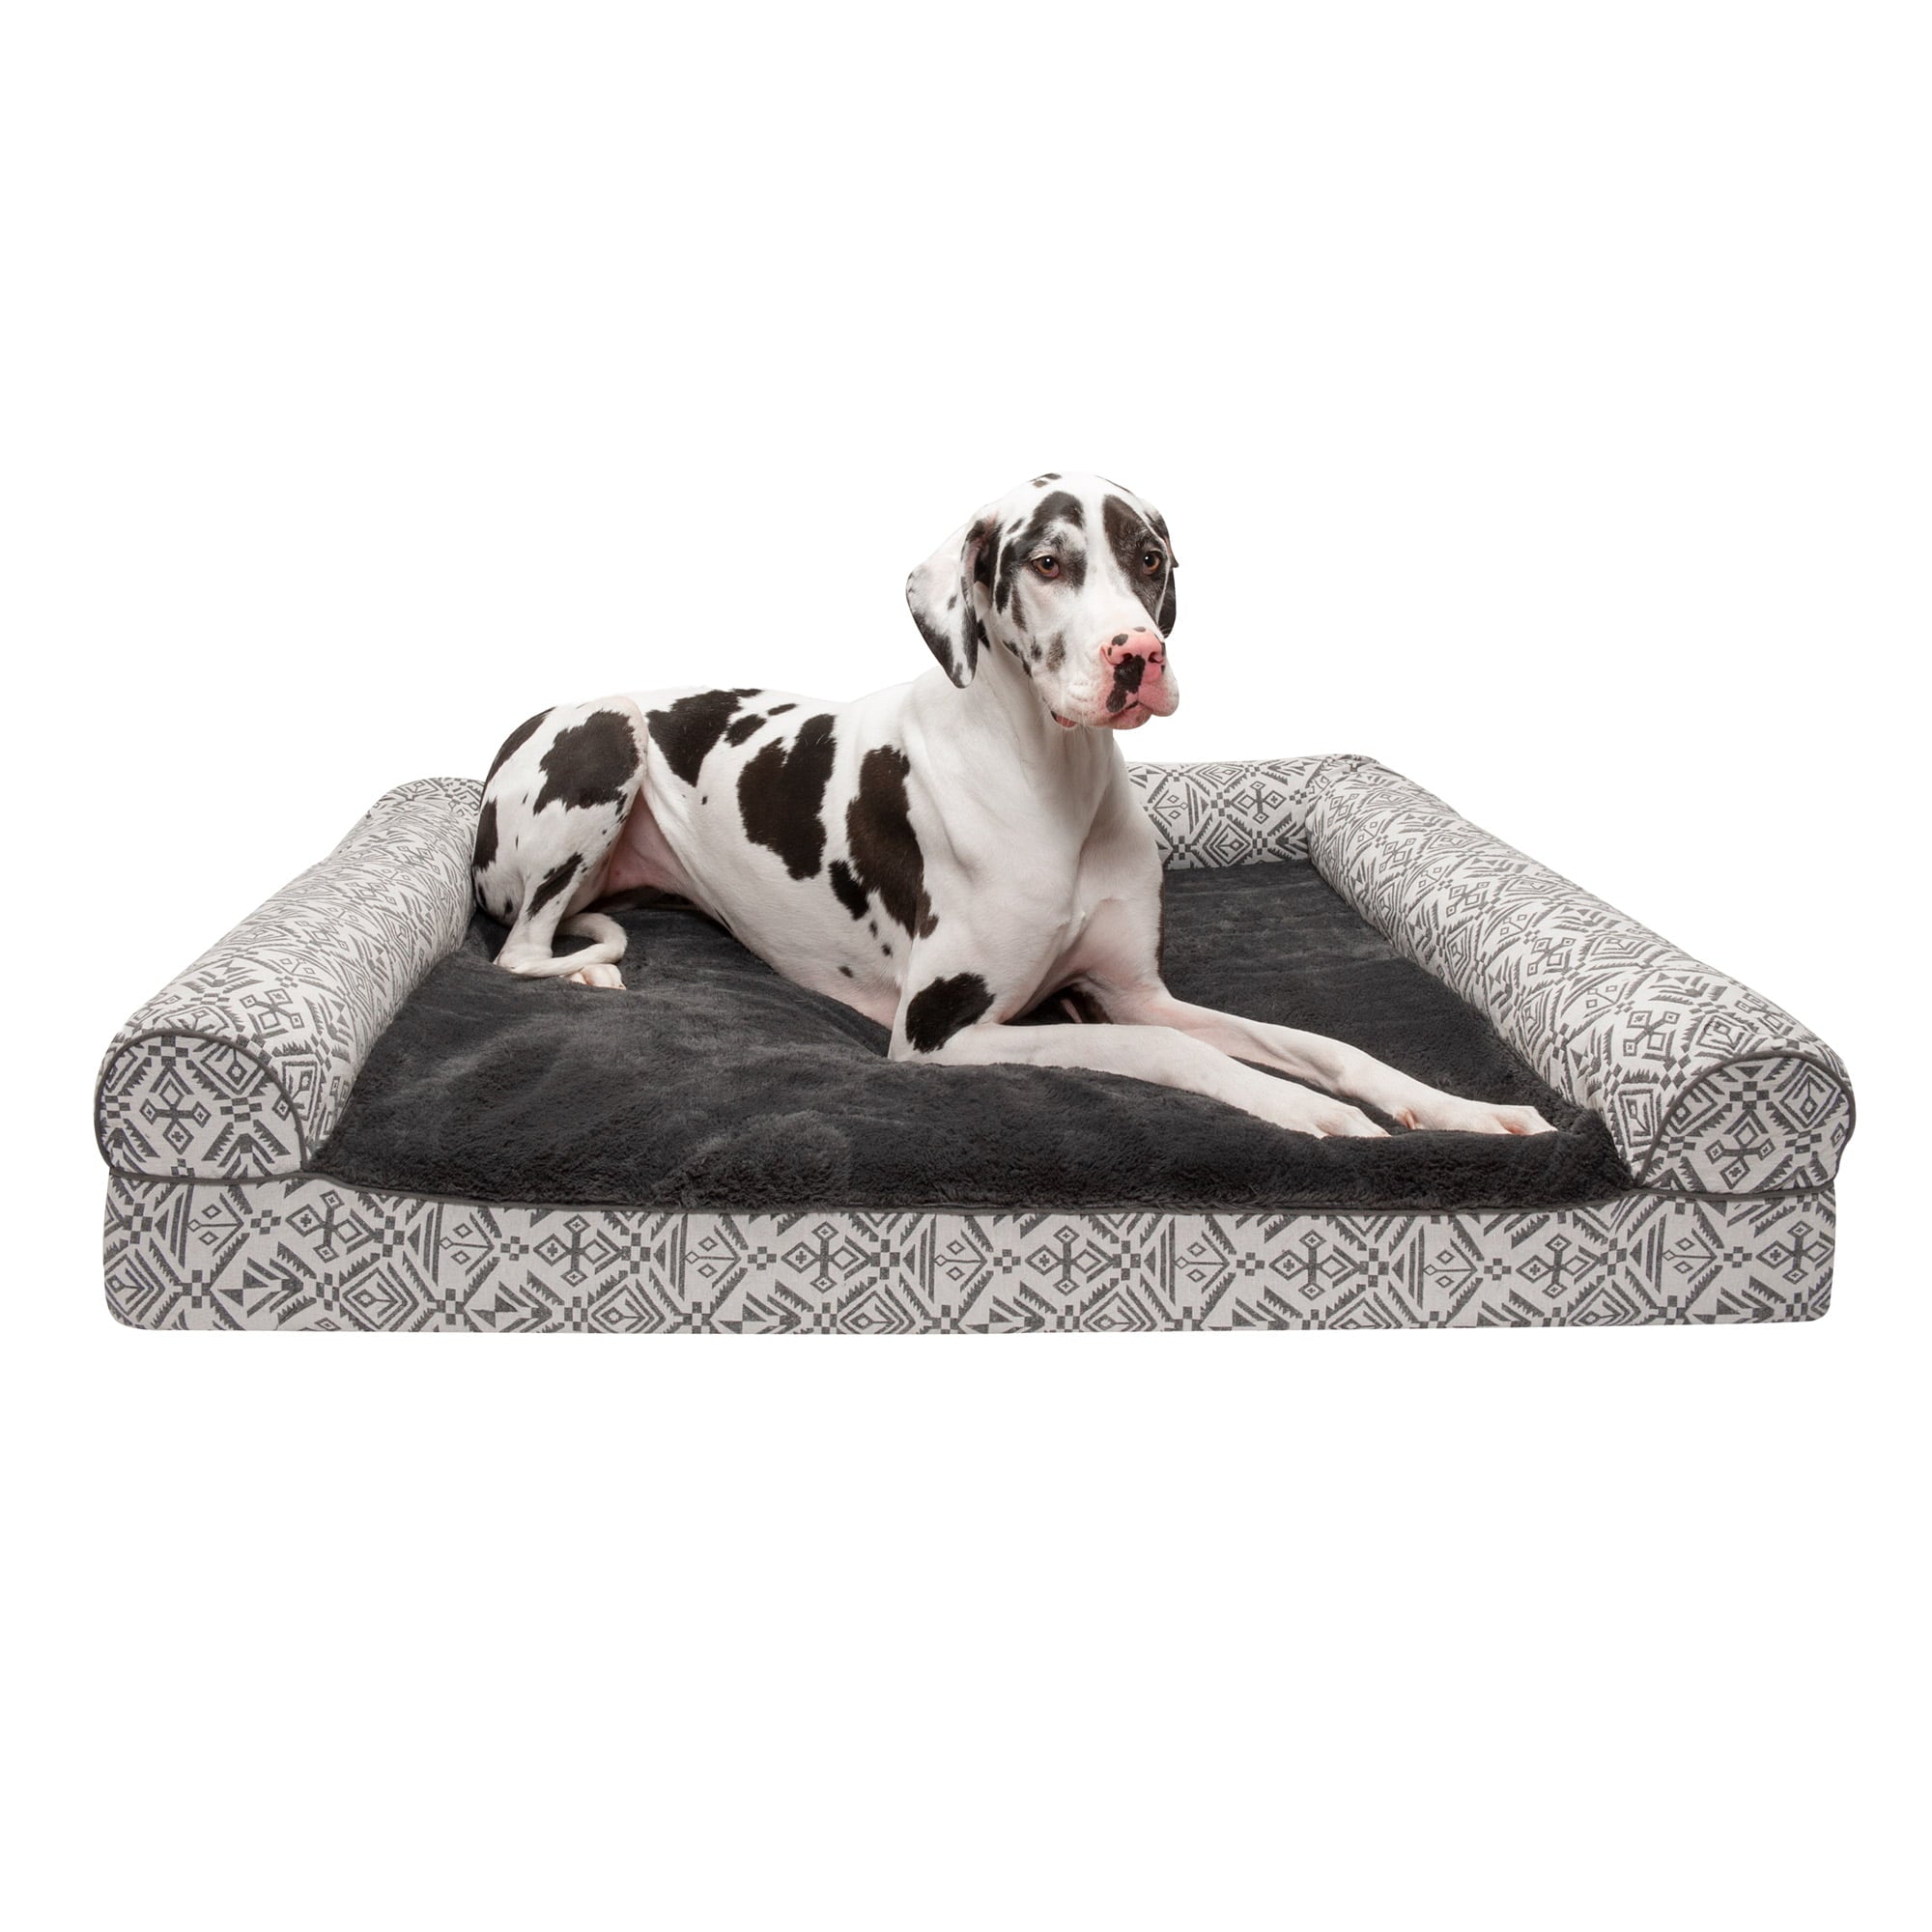 FurHaven | Cooling Gel Southwest Kilim Sofa Pet Bed for Dogs and Cats， Boulder Gray， Jumbo Plus